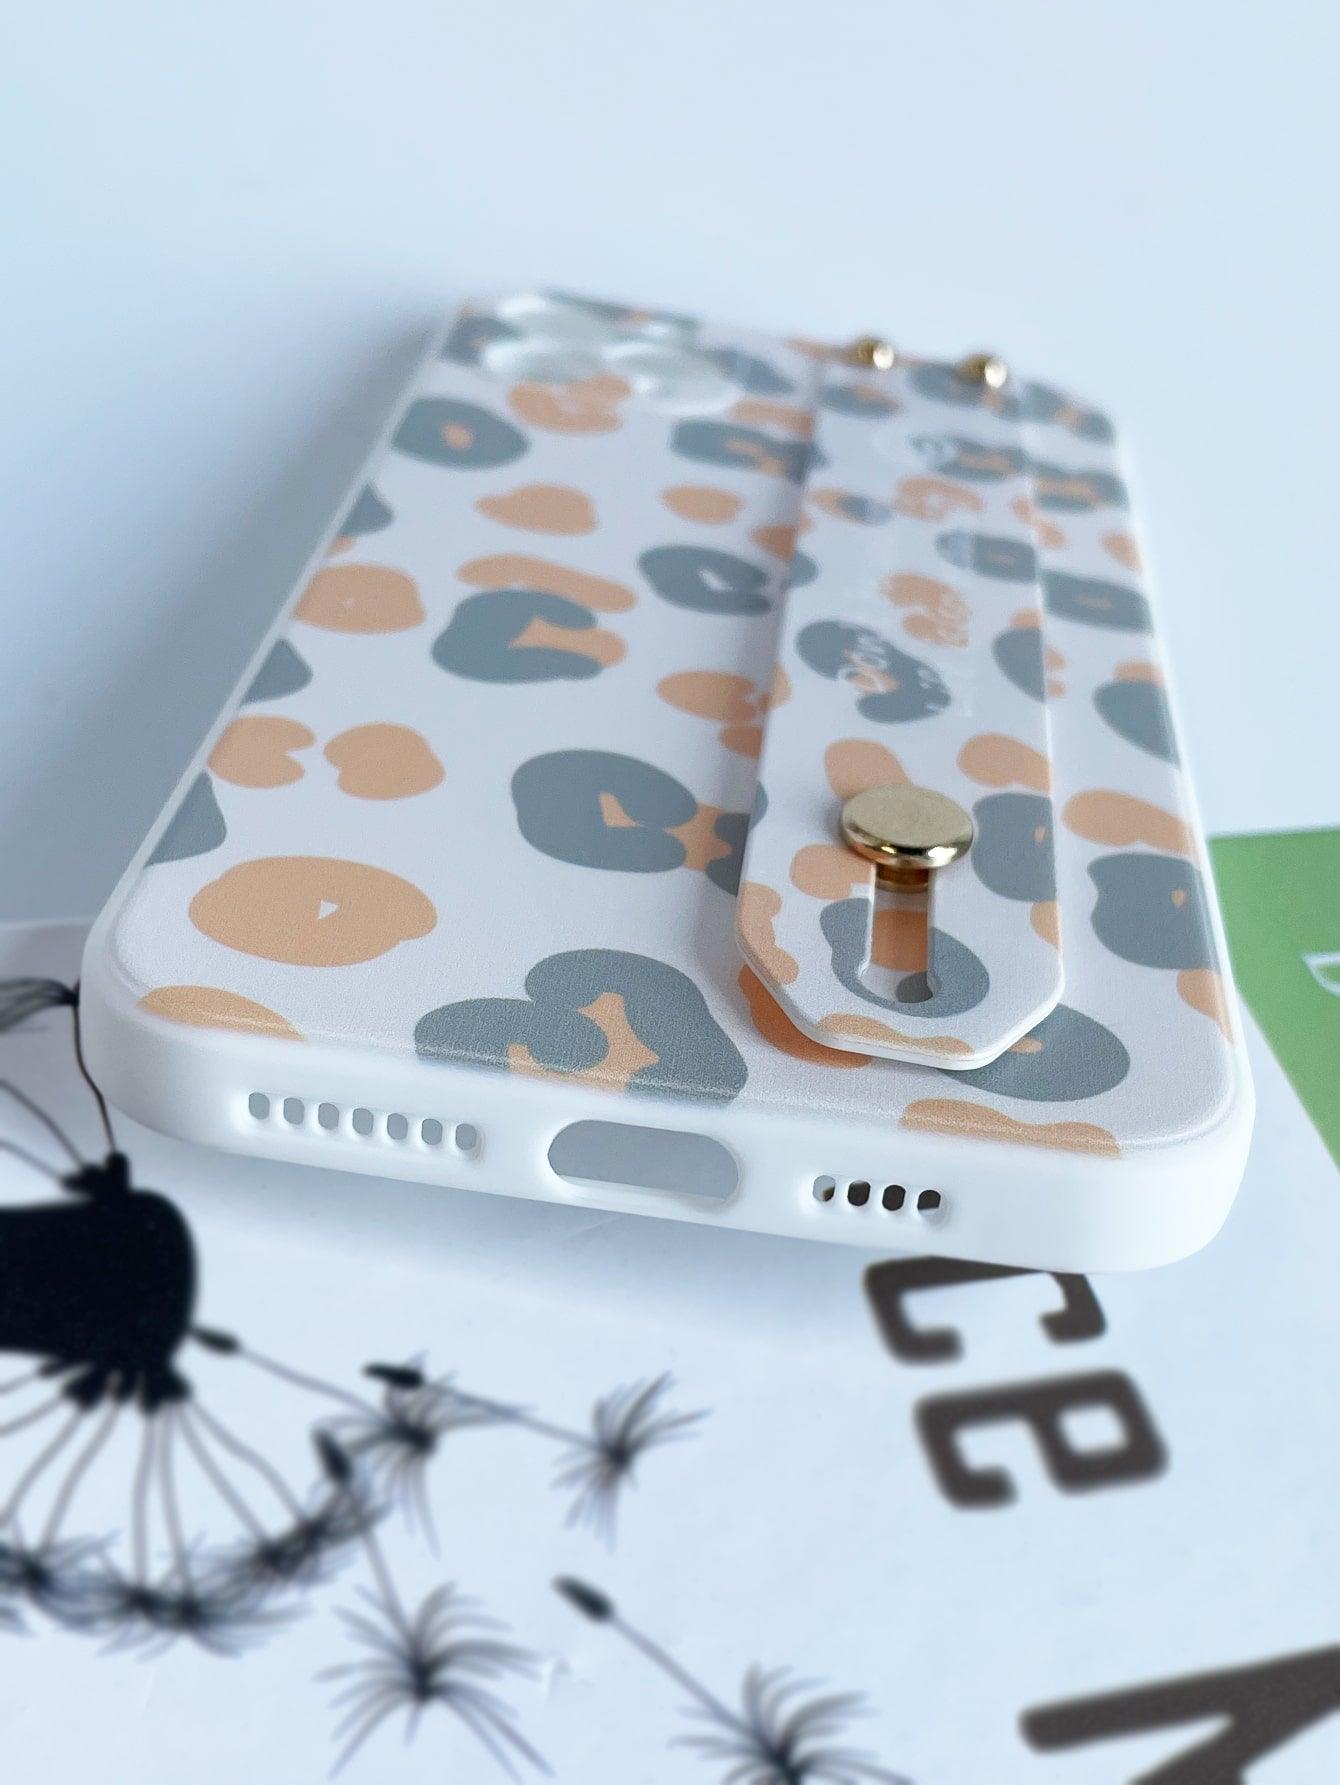 Leopard Phone Case With Wristband - Decotree.co Online Shop